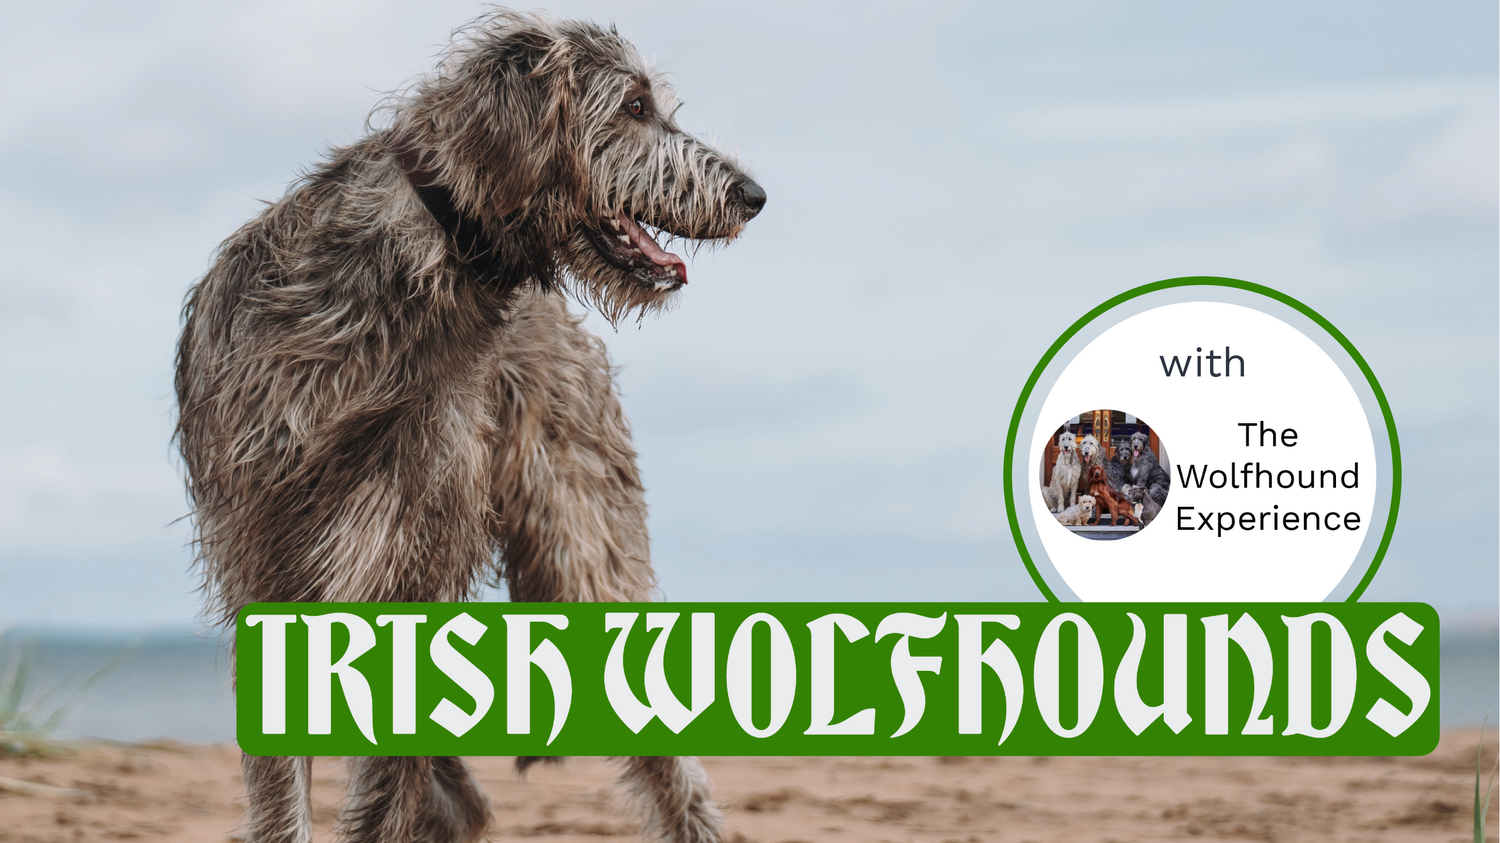 A grey Irish Wolfhound standing on a beach looking to the right and a box with text “Irish Wolfhounds”